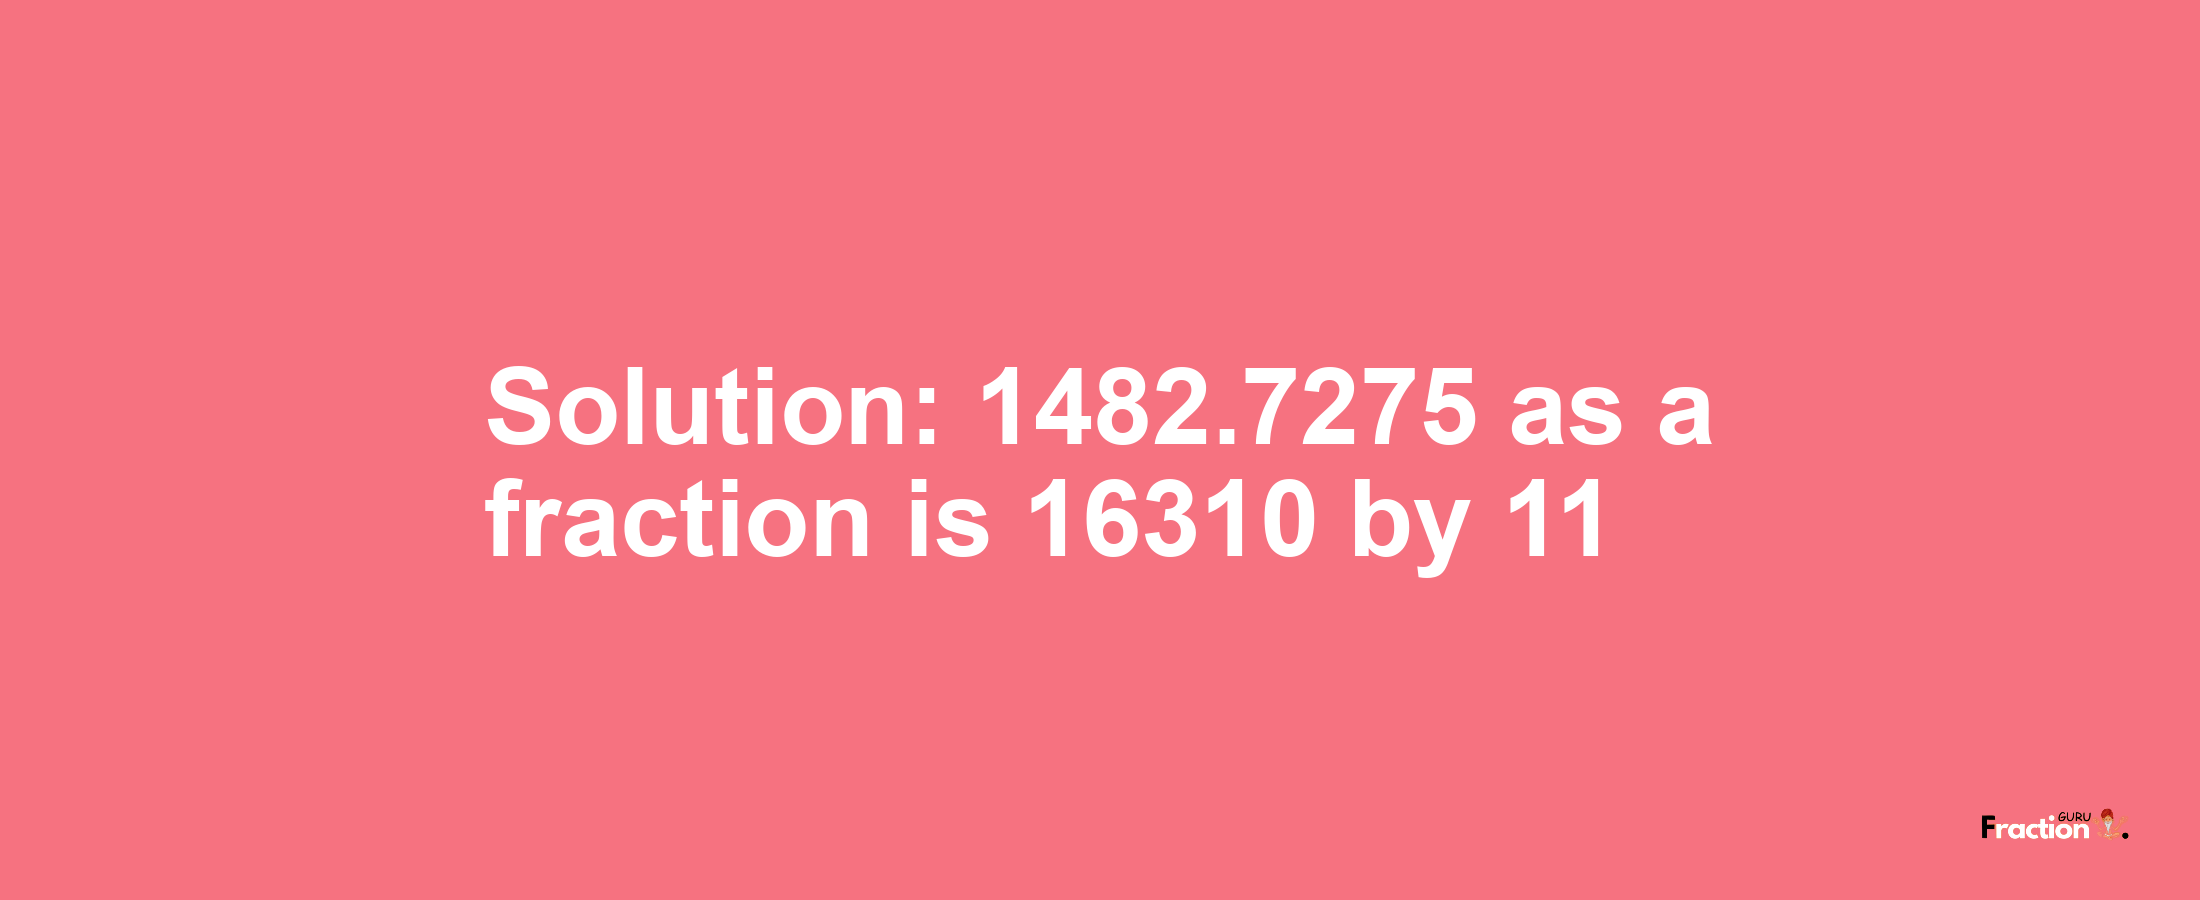 Solution:1482.7275 as a fraction is 16310/11